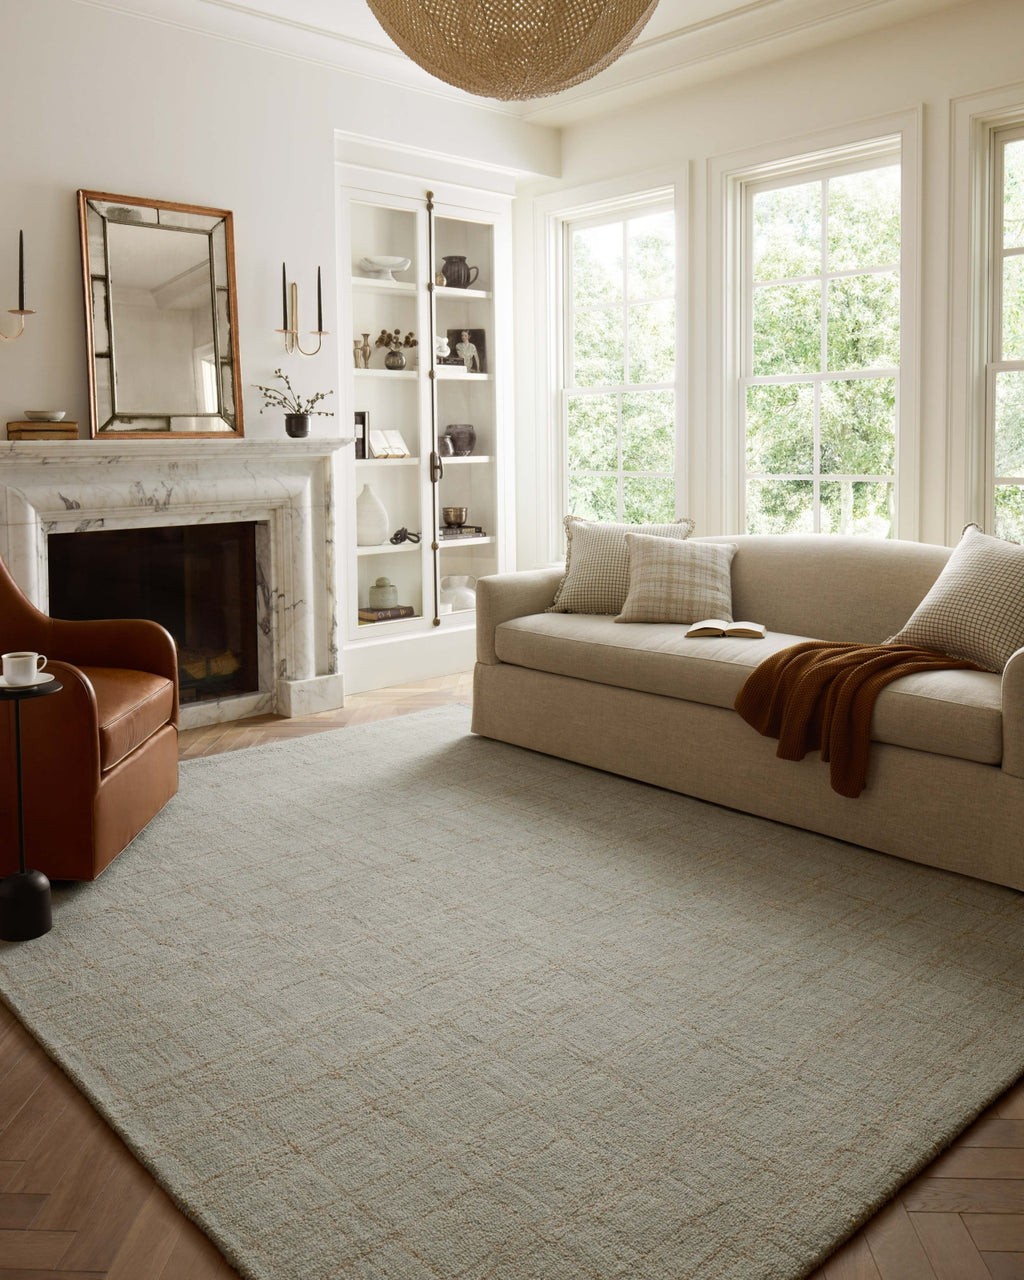 Polly POL-09 Fog/Wheat Area Rug by Chris Loves Julia x Loloi Lifestyle Image Feature